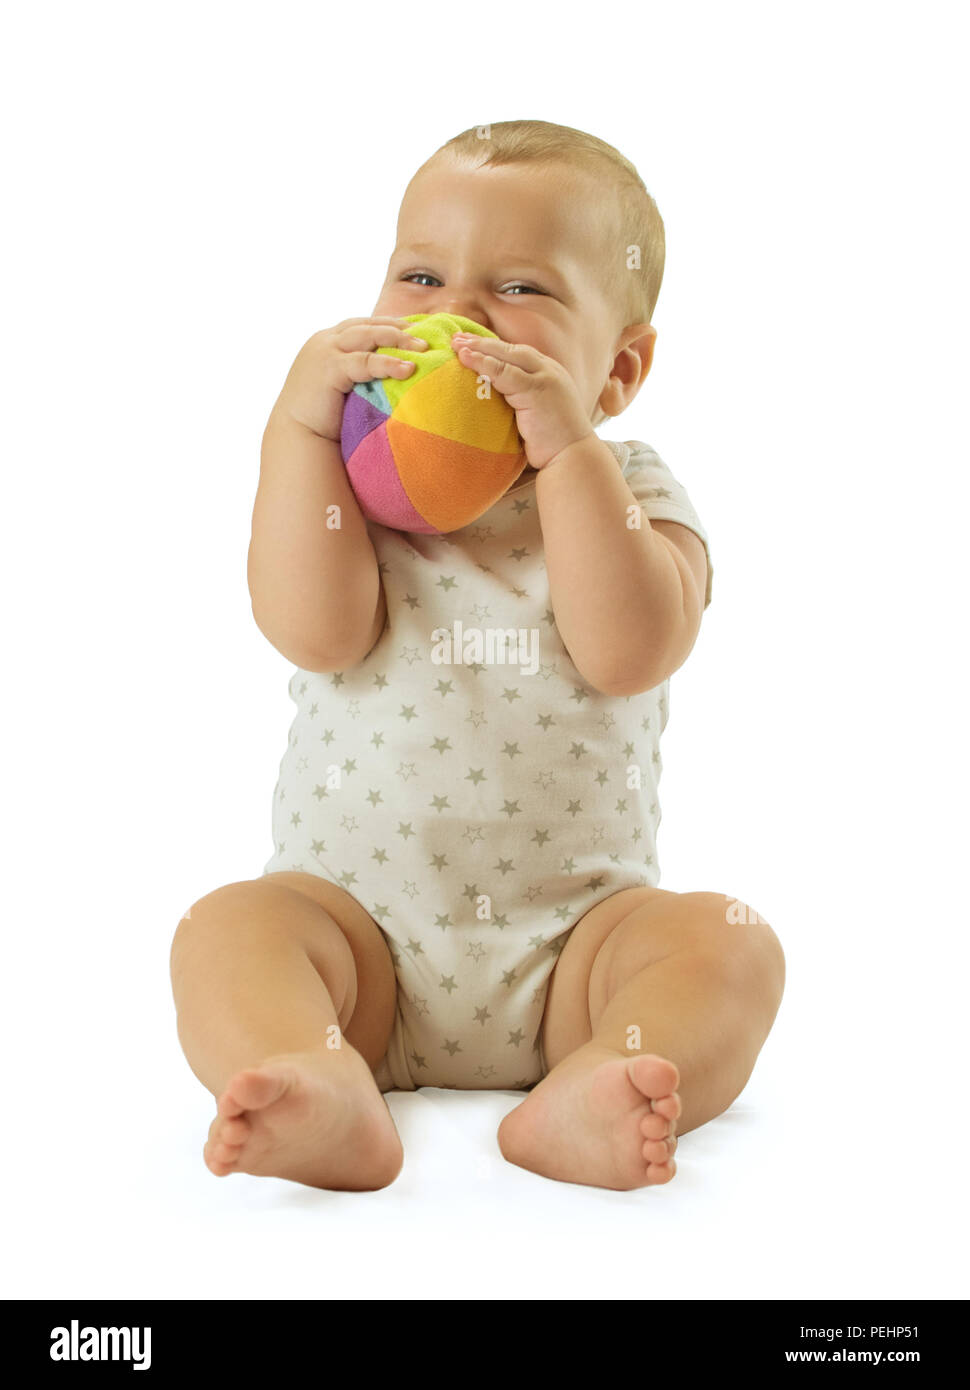 Cute baby boy holding the ball in front of his face and smiling. Isolated on white background. Stock Photo